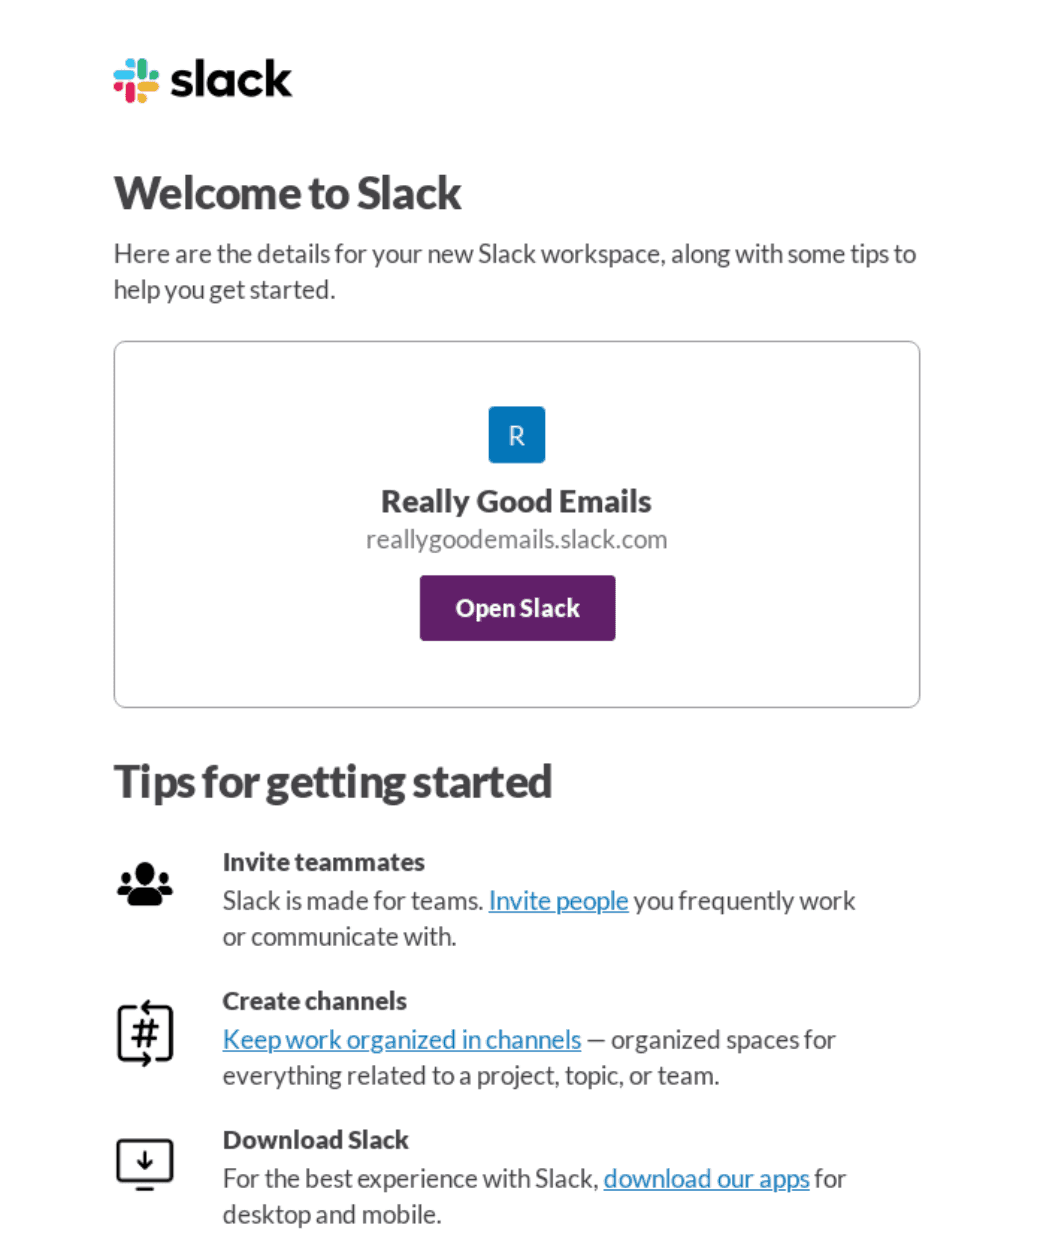 Transactional "Welcome to Slack" email